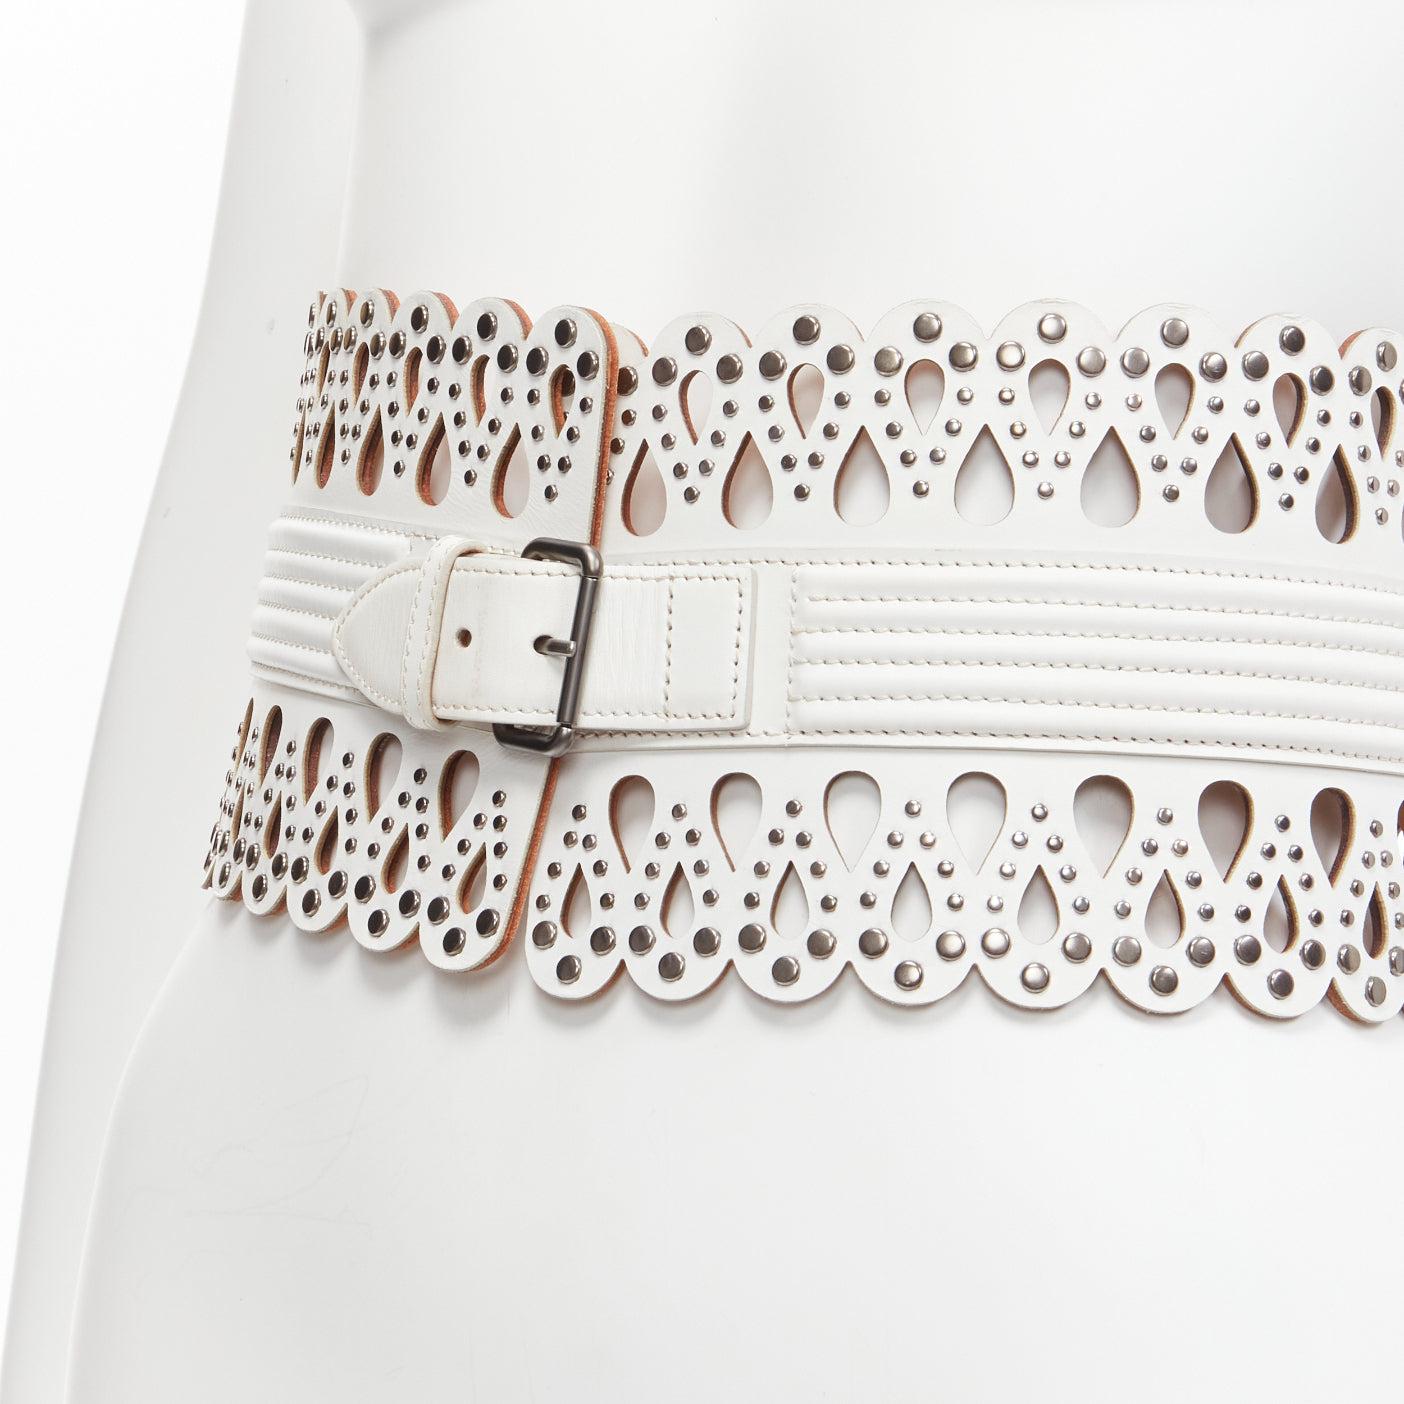 AZZEDINE ALAIA white laser cut studded leather corset waist belt 70cm
Reference: BSHW/A00139
Brand: Alaia
Designer: Azzedine Alaia
Material: Leather
Color: White, Metallic
Pattern: Solid
Closure: Belt
Lining: Beige Leather
Made in: